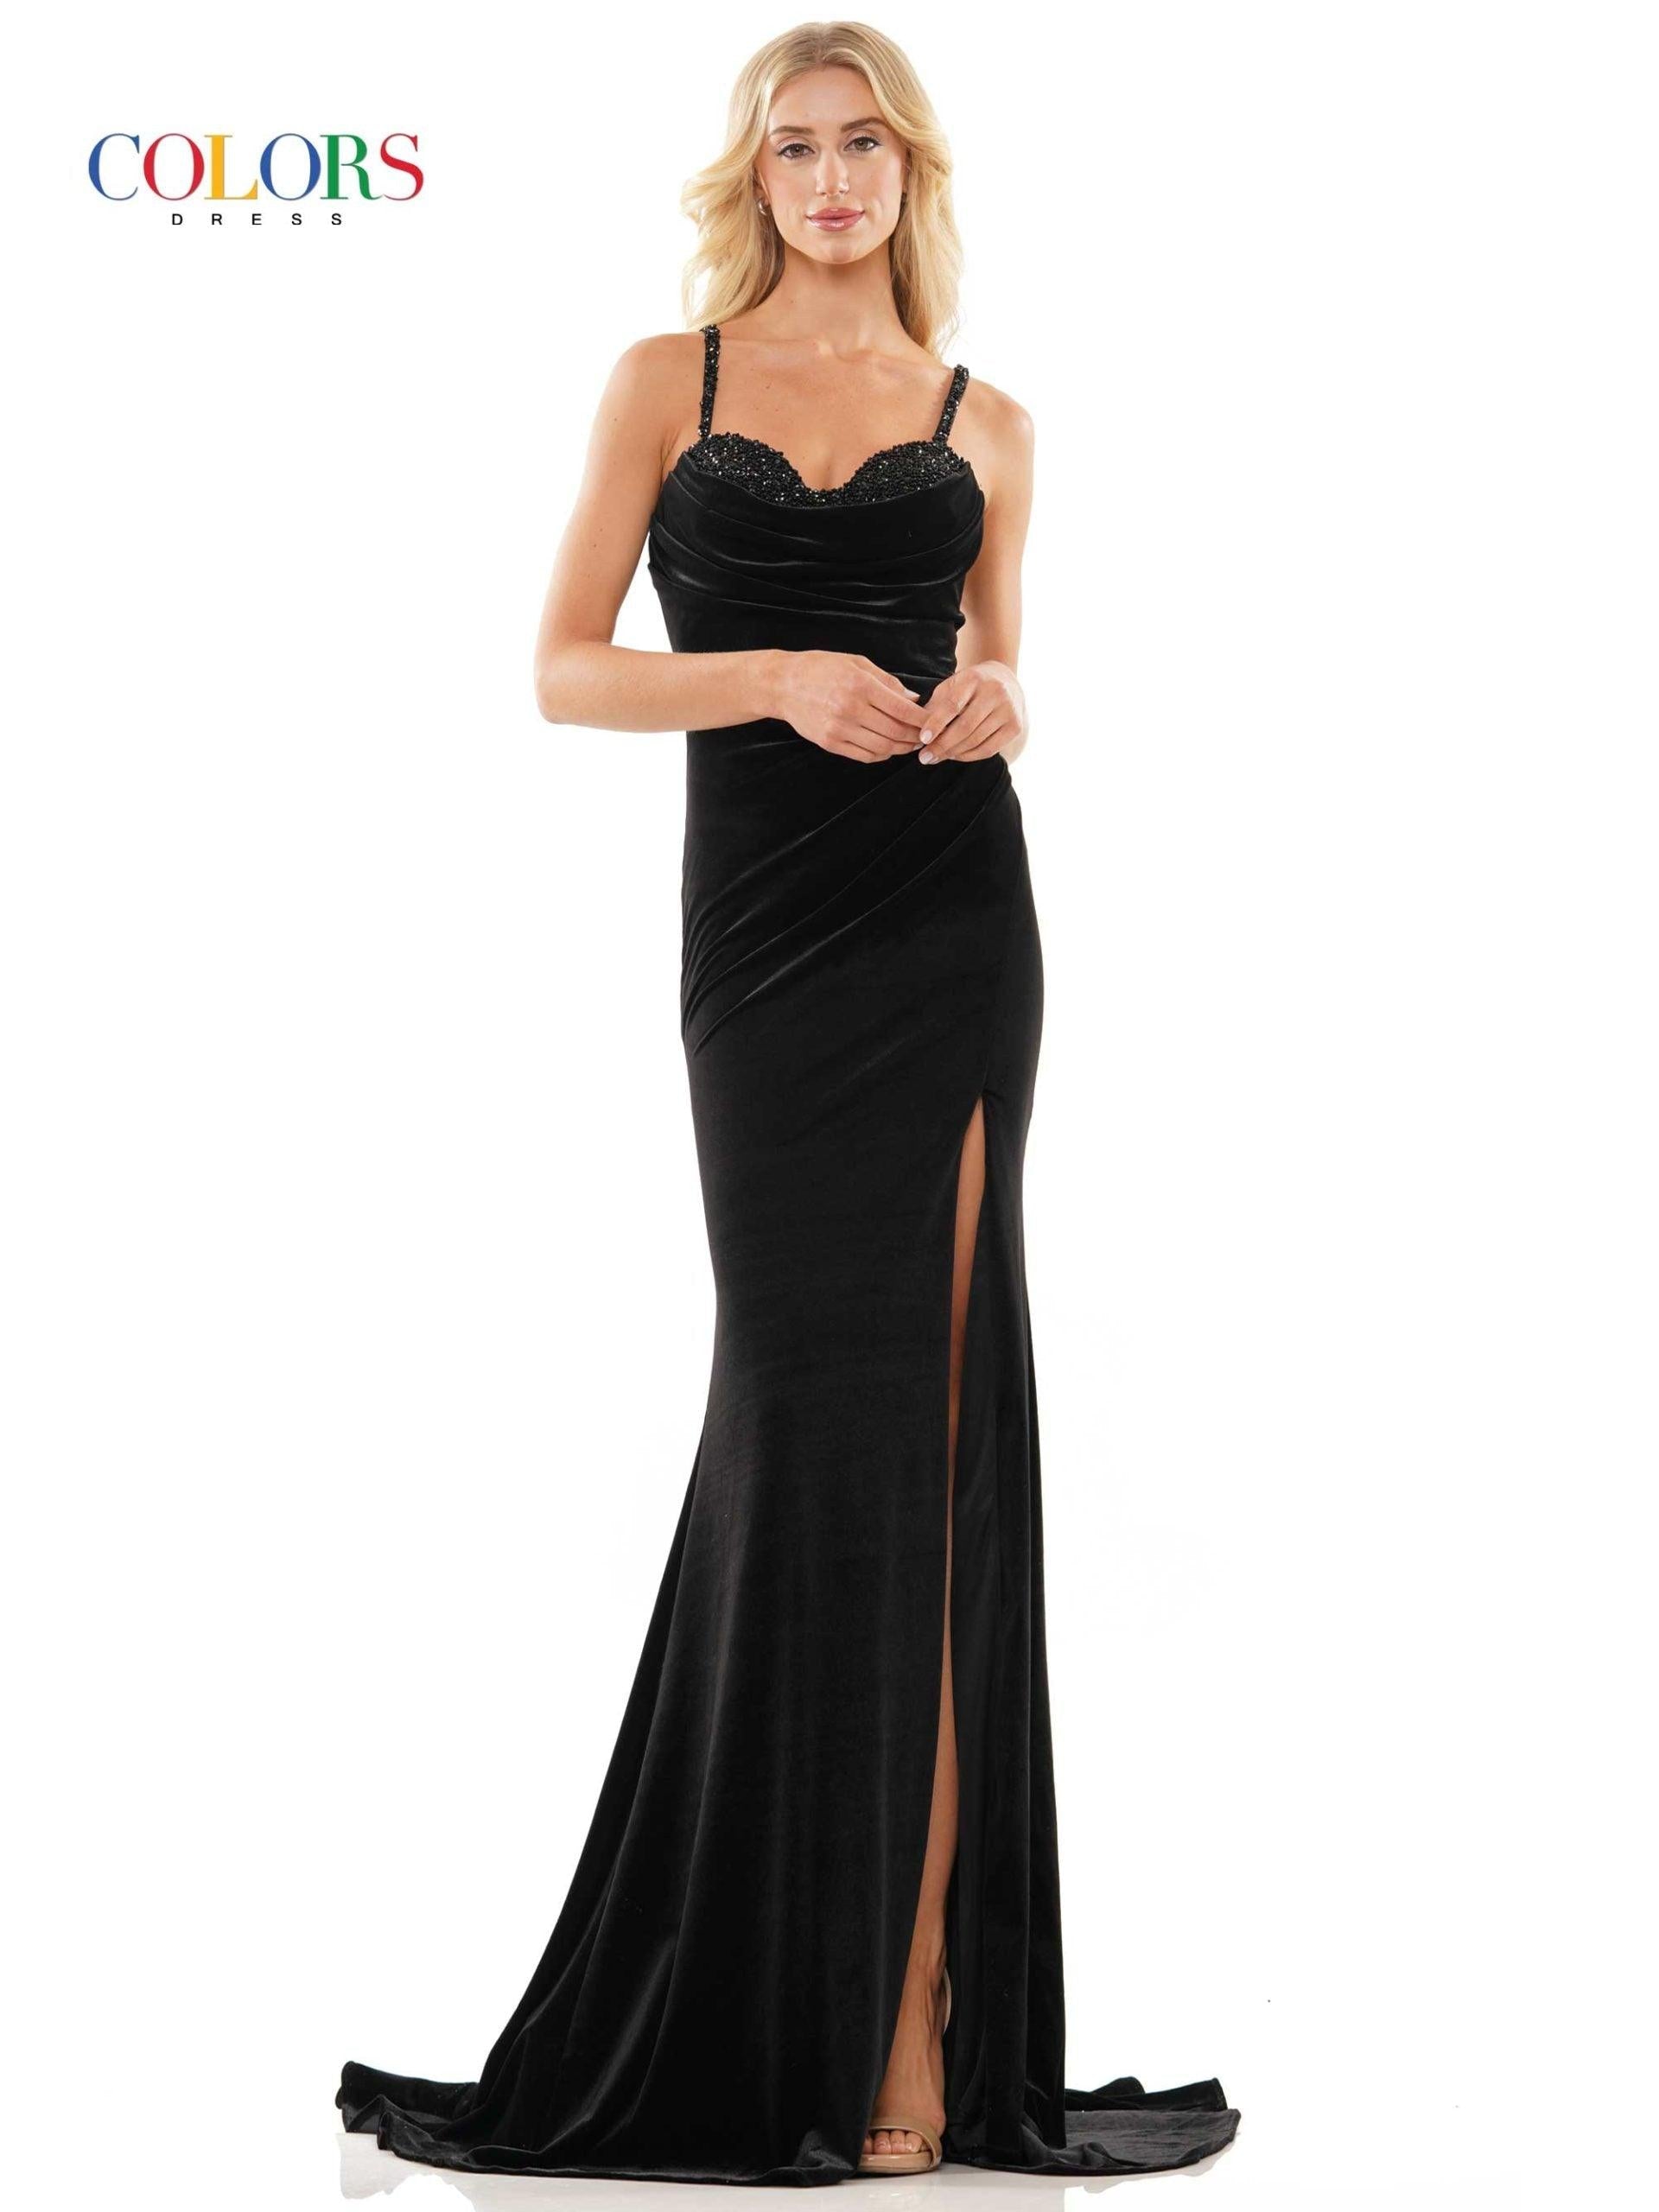 Colors Spaghetti Straps Long Prom Dress 2885 - The Dress Outlet